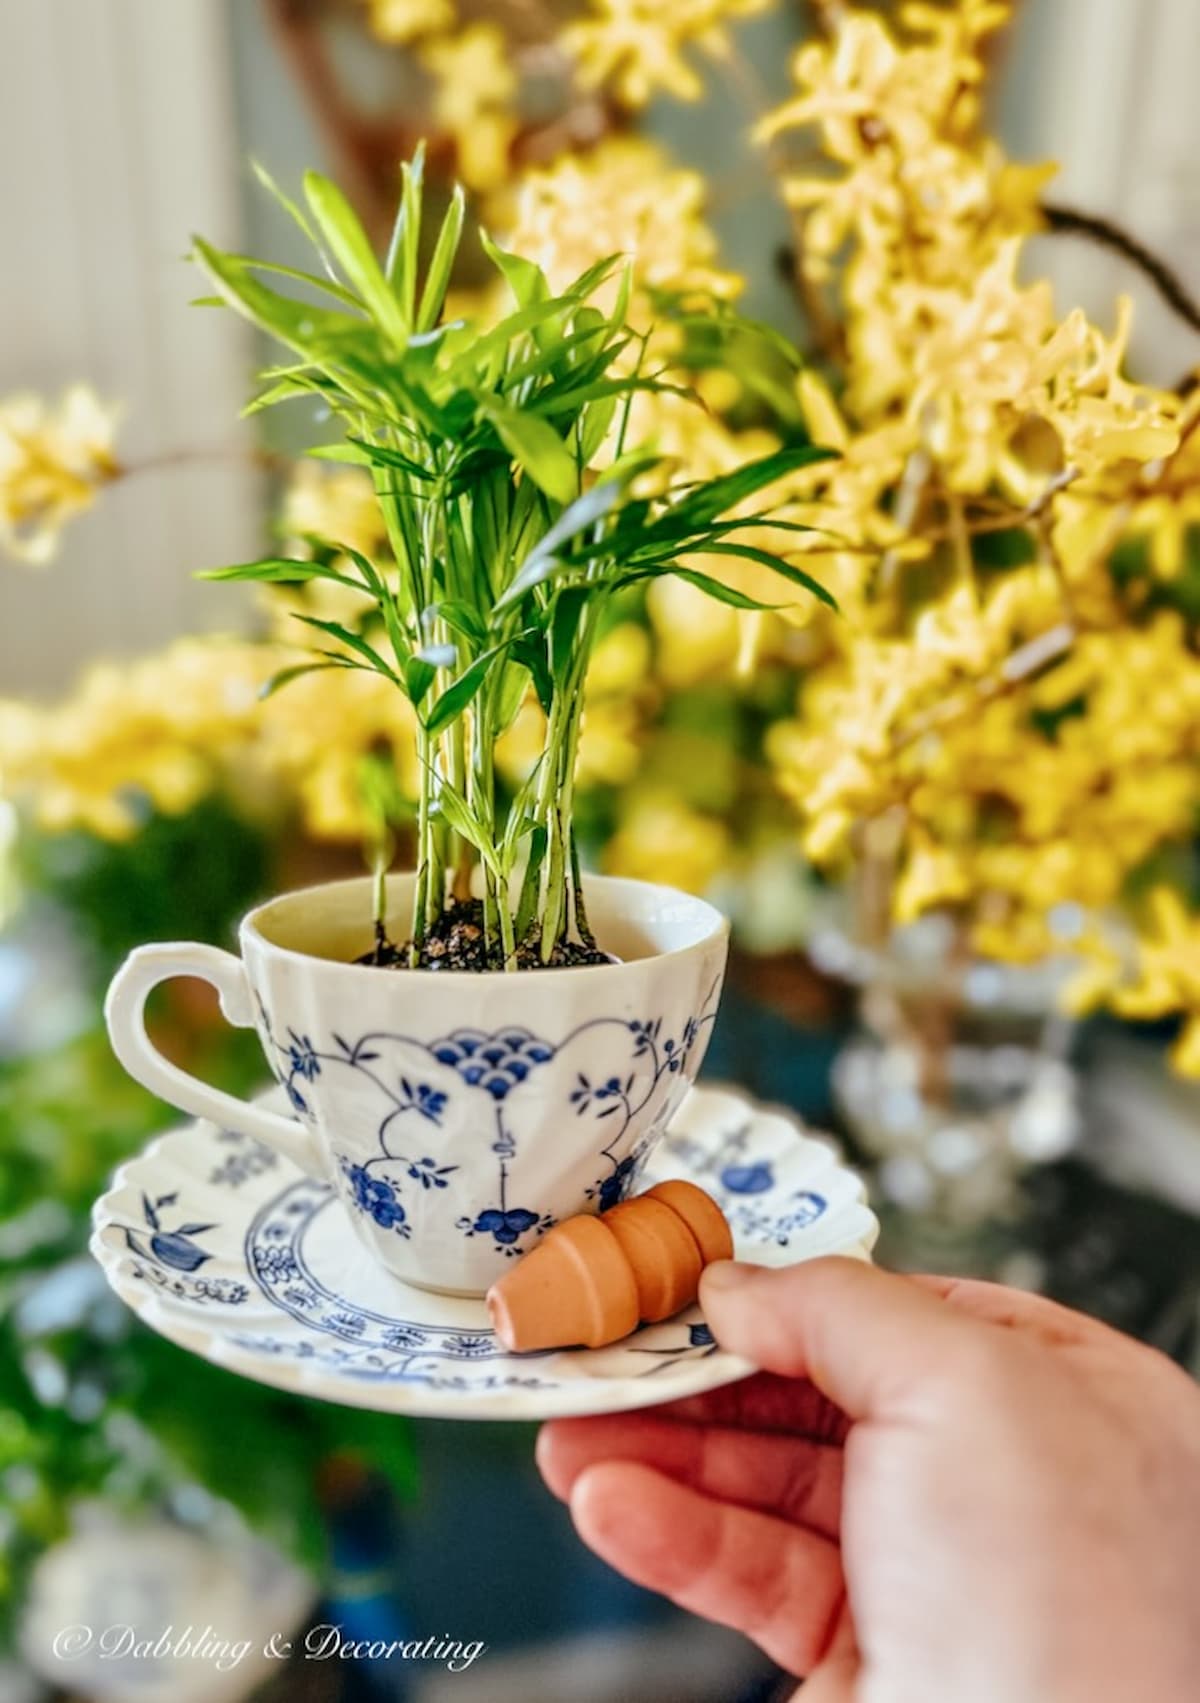 Green Plant Decor in Blue and White Tea Cup with Tiny Terracotta Pots in Hand